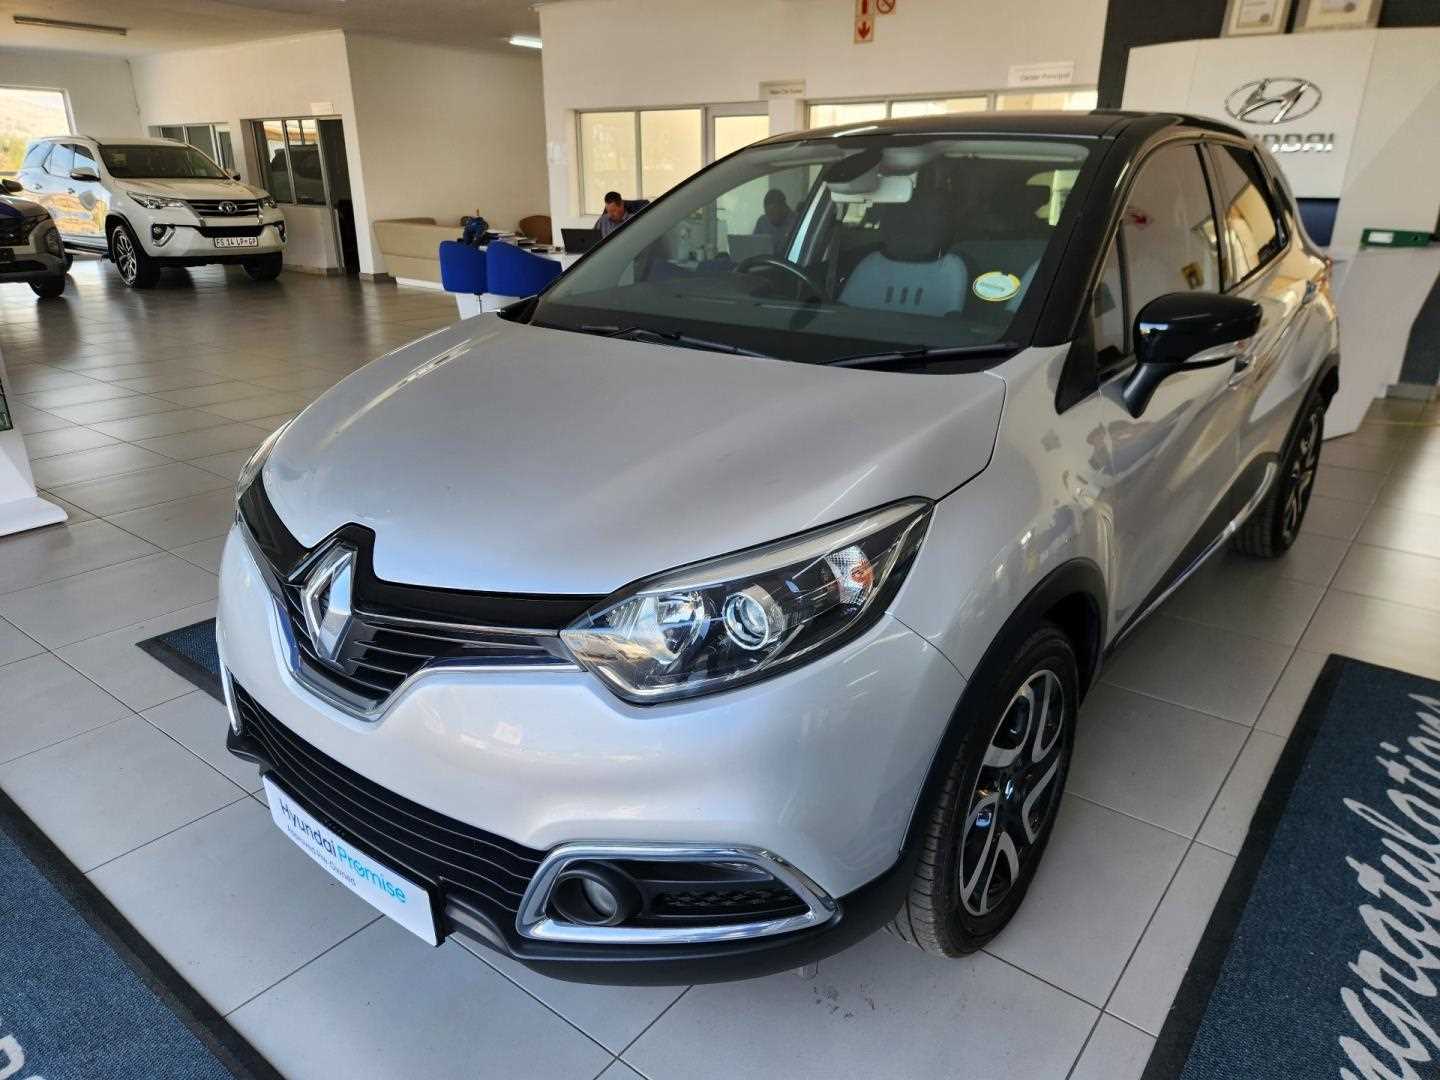 Renault CAPTUR 1.5 dCI DYNAMIQUE 5DR (66KW) for Sale in South Africa